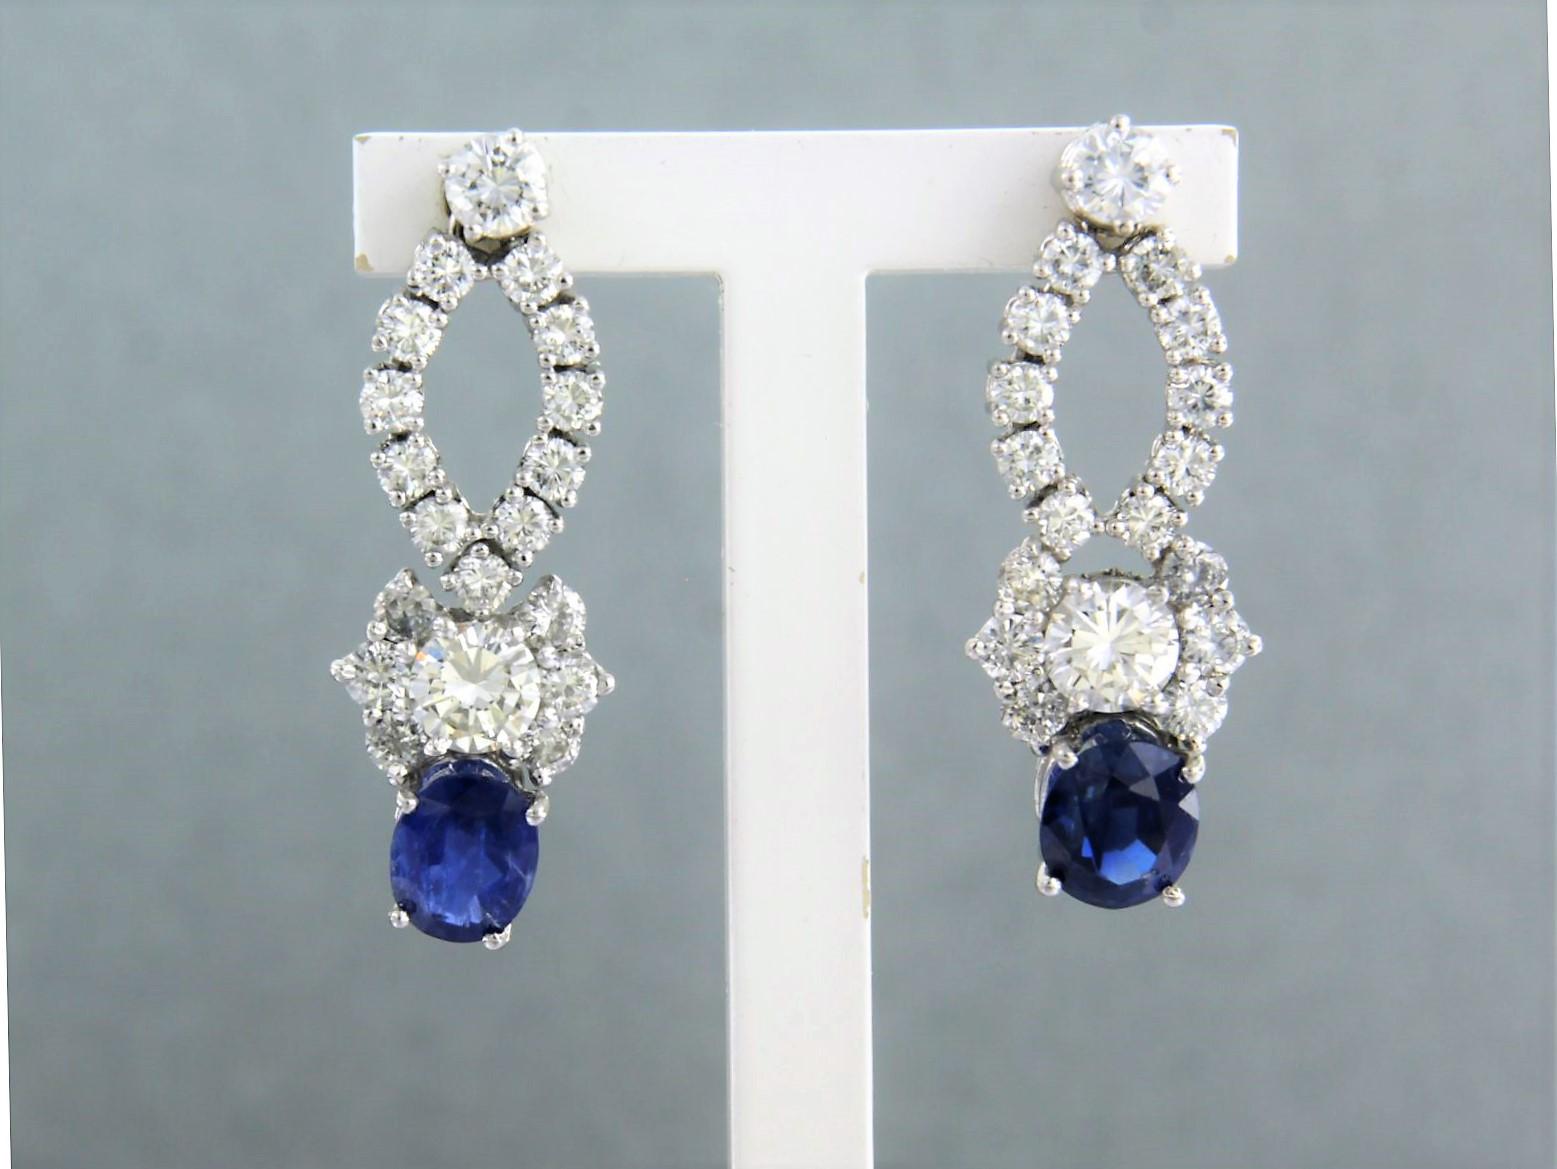 18k white gold earrings set with sapphire up to. 2.00ct and brilliant cut diamonds up to. 2.00ct - F/G - VS/SI

detailed description:

the size of the earring is 2.8 cm long by 1.0 cm wide

weight 7.8 grams

set with

- 2 x 6.0 mm x 5.0 mm oval